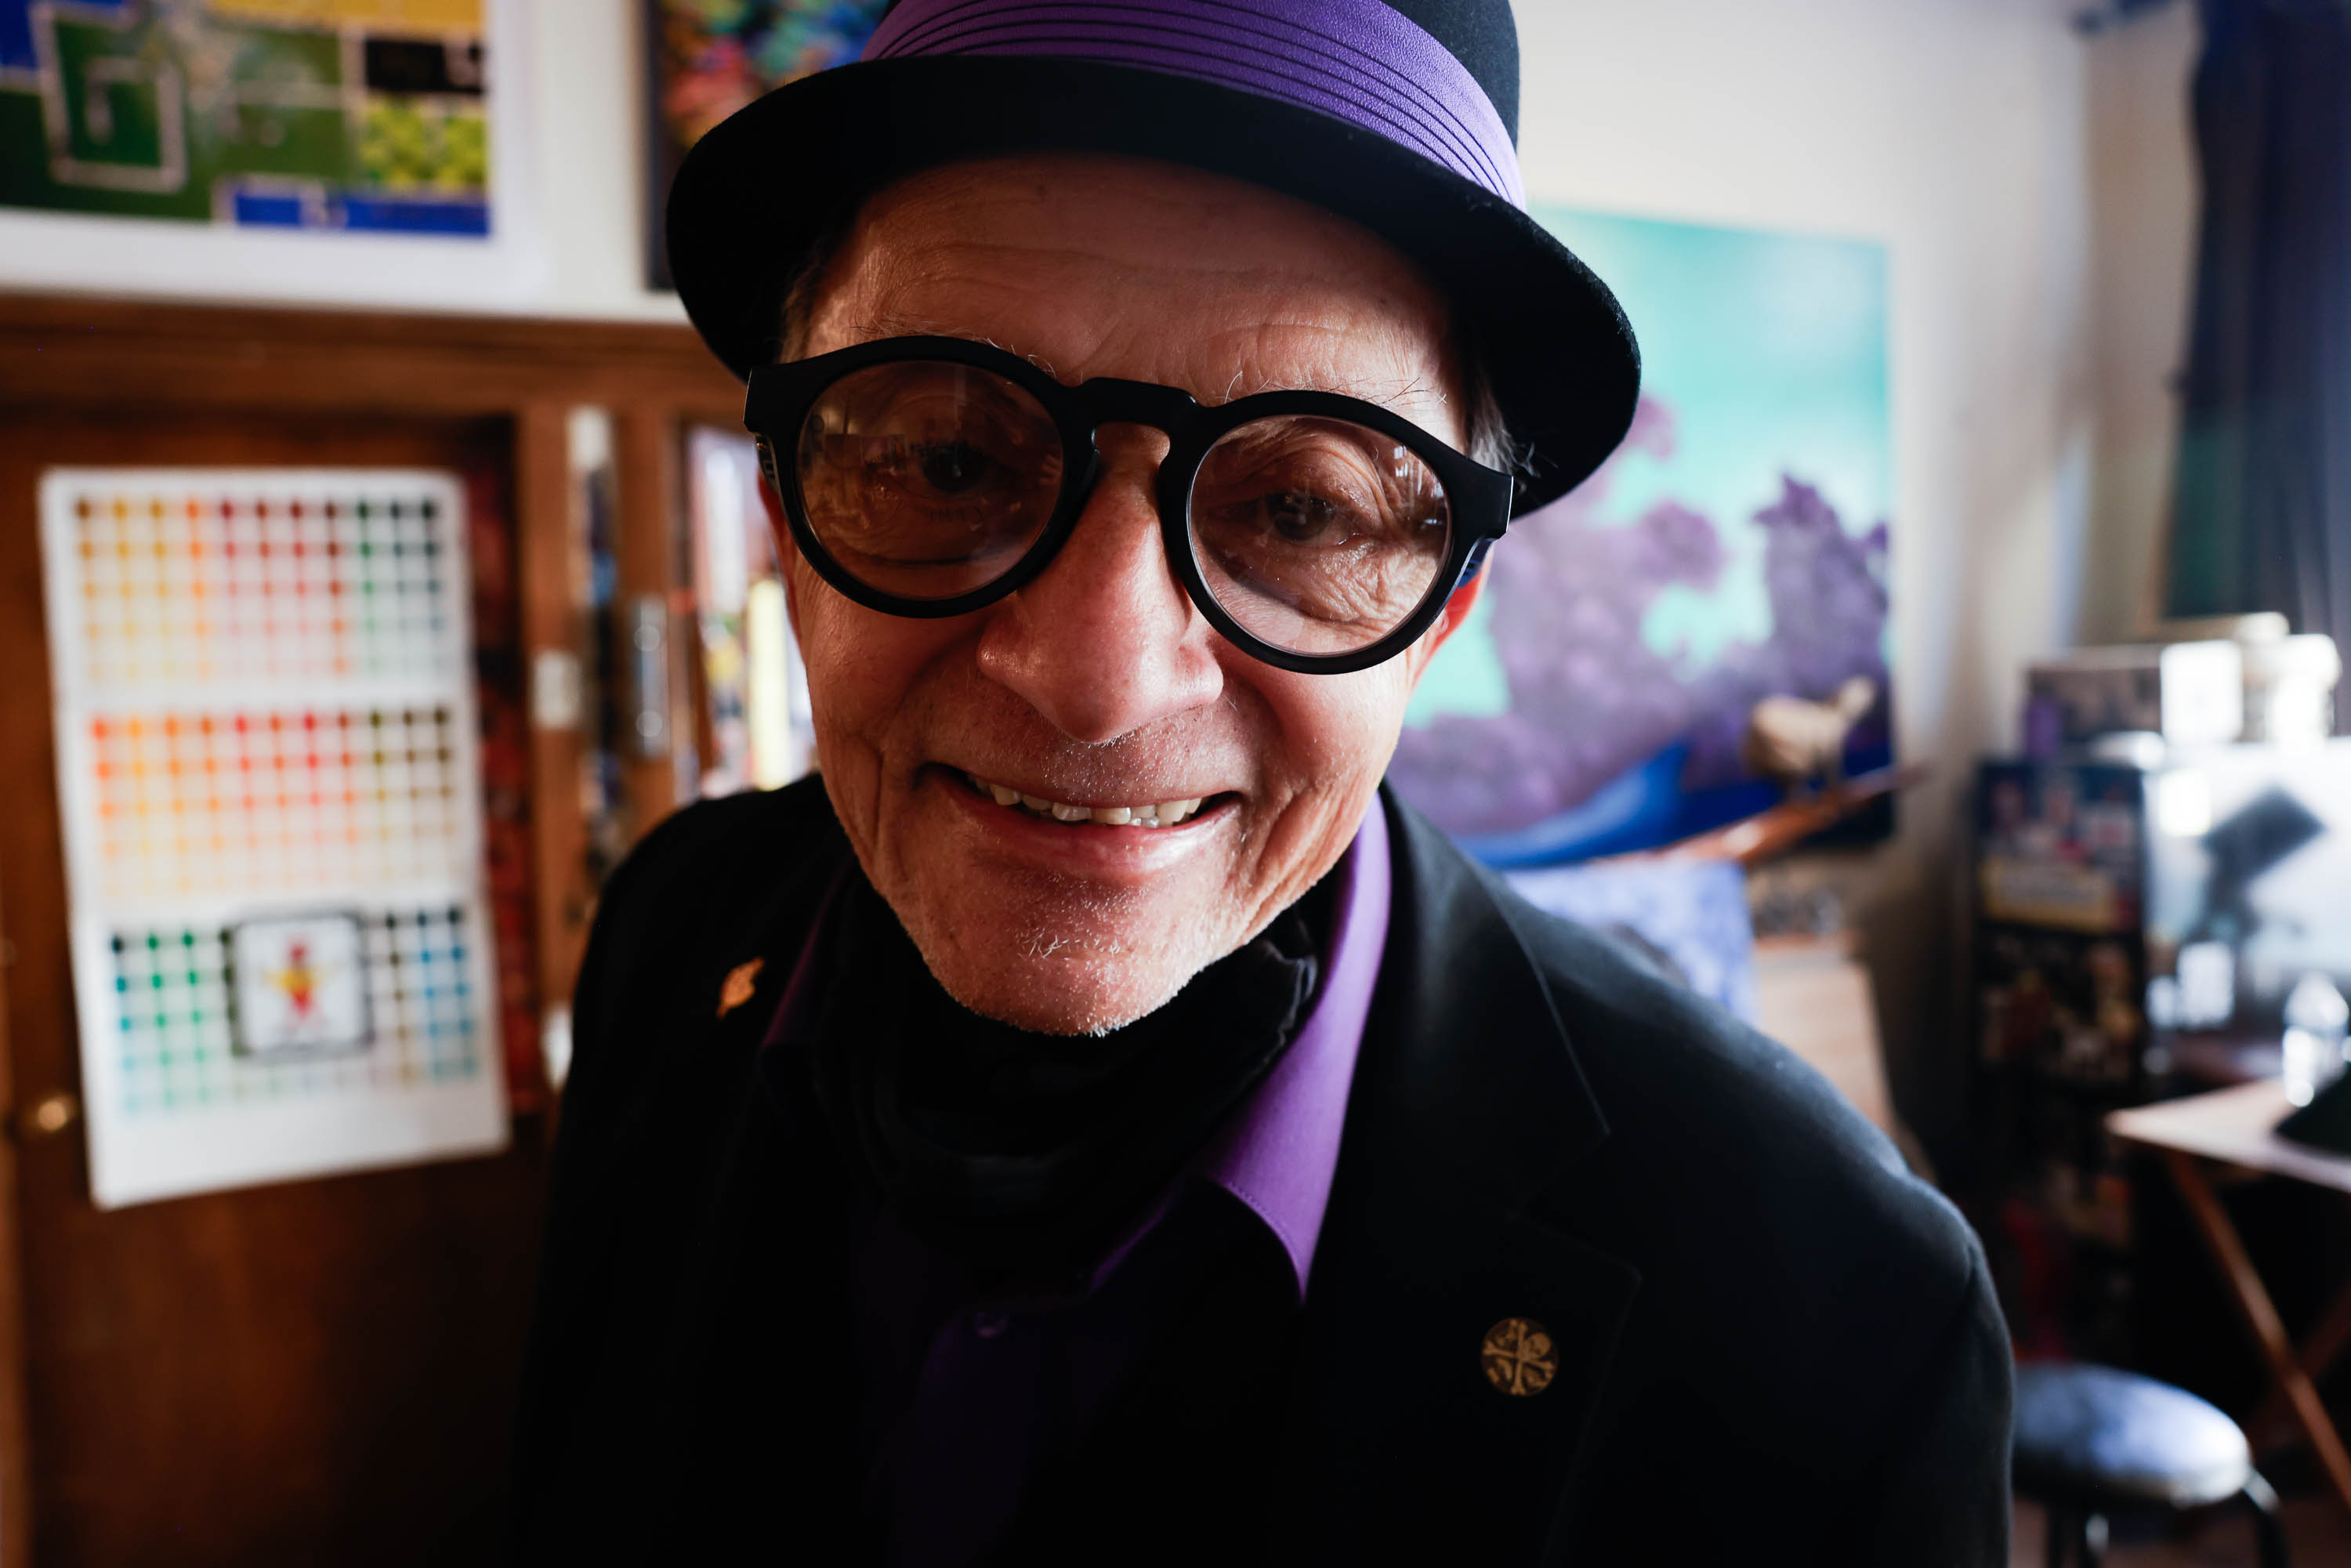 An elderly man in large black glasses and a purple hat smiles closely at the camera, with art and a cozy room in the background.